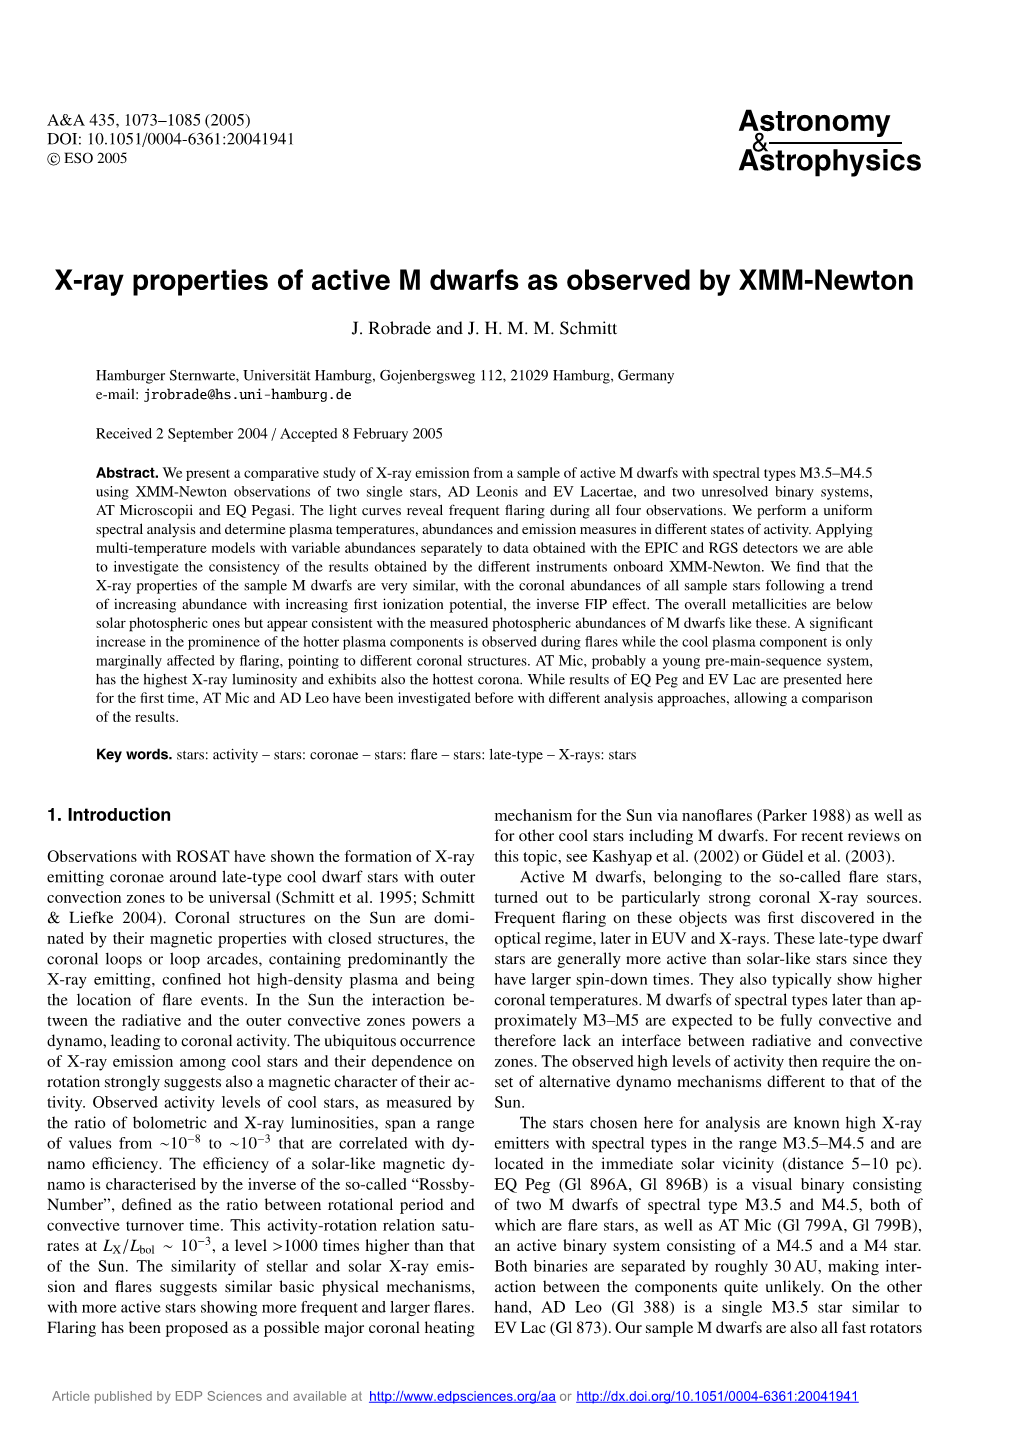 X-Ray Properties of Active M Dwarfs As Observed by XMM-Newton